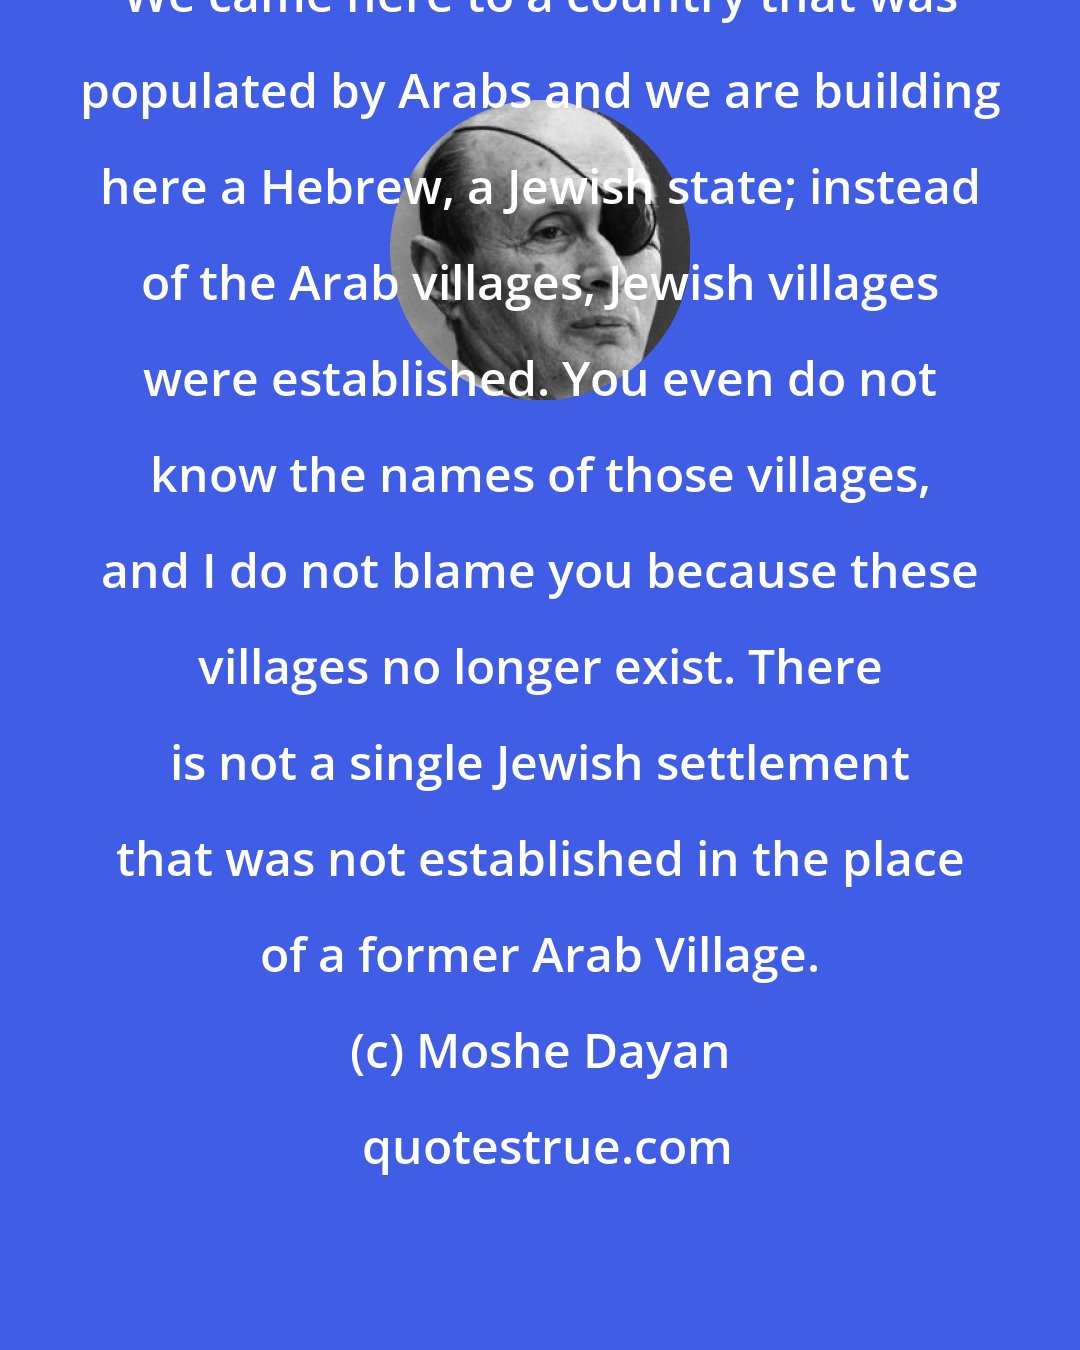 Moshe Dayan: We came here to a country that was populated by Arabs and we are building here a Hebrew, a Jewish state; instead of the Arab villages, Jewish villages were established. You even do not know the names of those villages, and I do not blame you because these villages no longer exist. There is not a single Jewish settlement that was not established in the place of a former Arab Village.